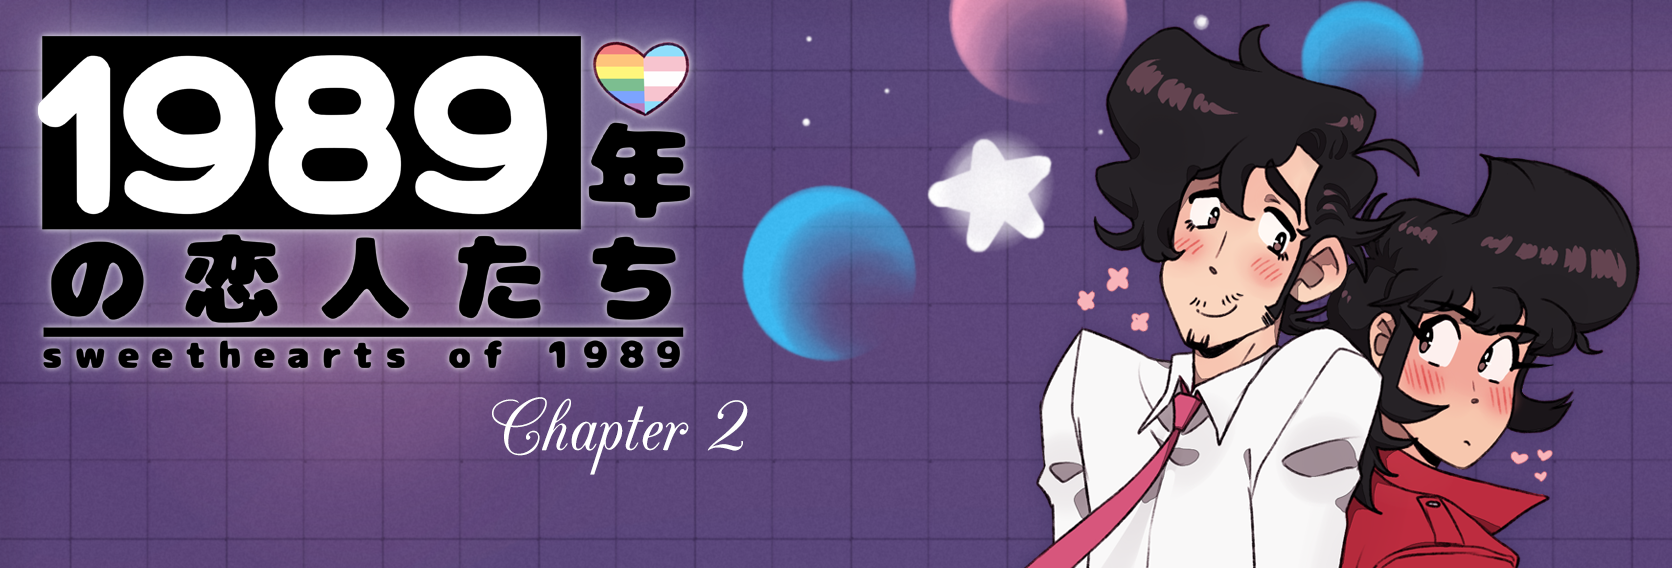 Sweethearts of 1989 (1989nk) Chapter Two